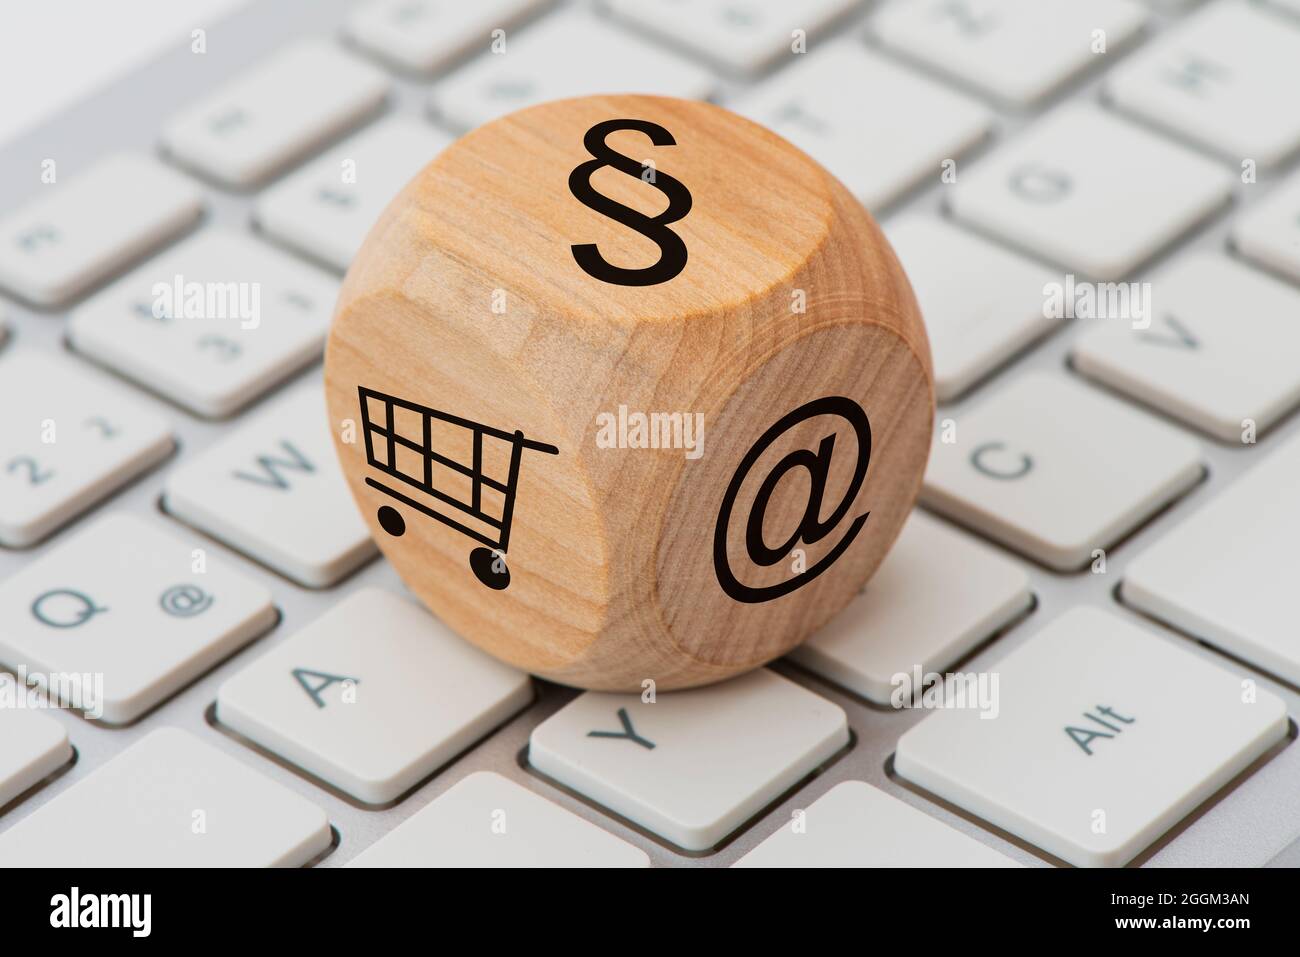 Online internet commerce and law printed on wooden cubes Stock Photo